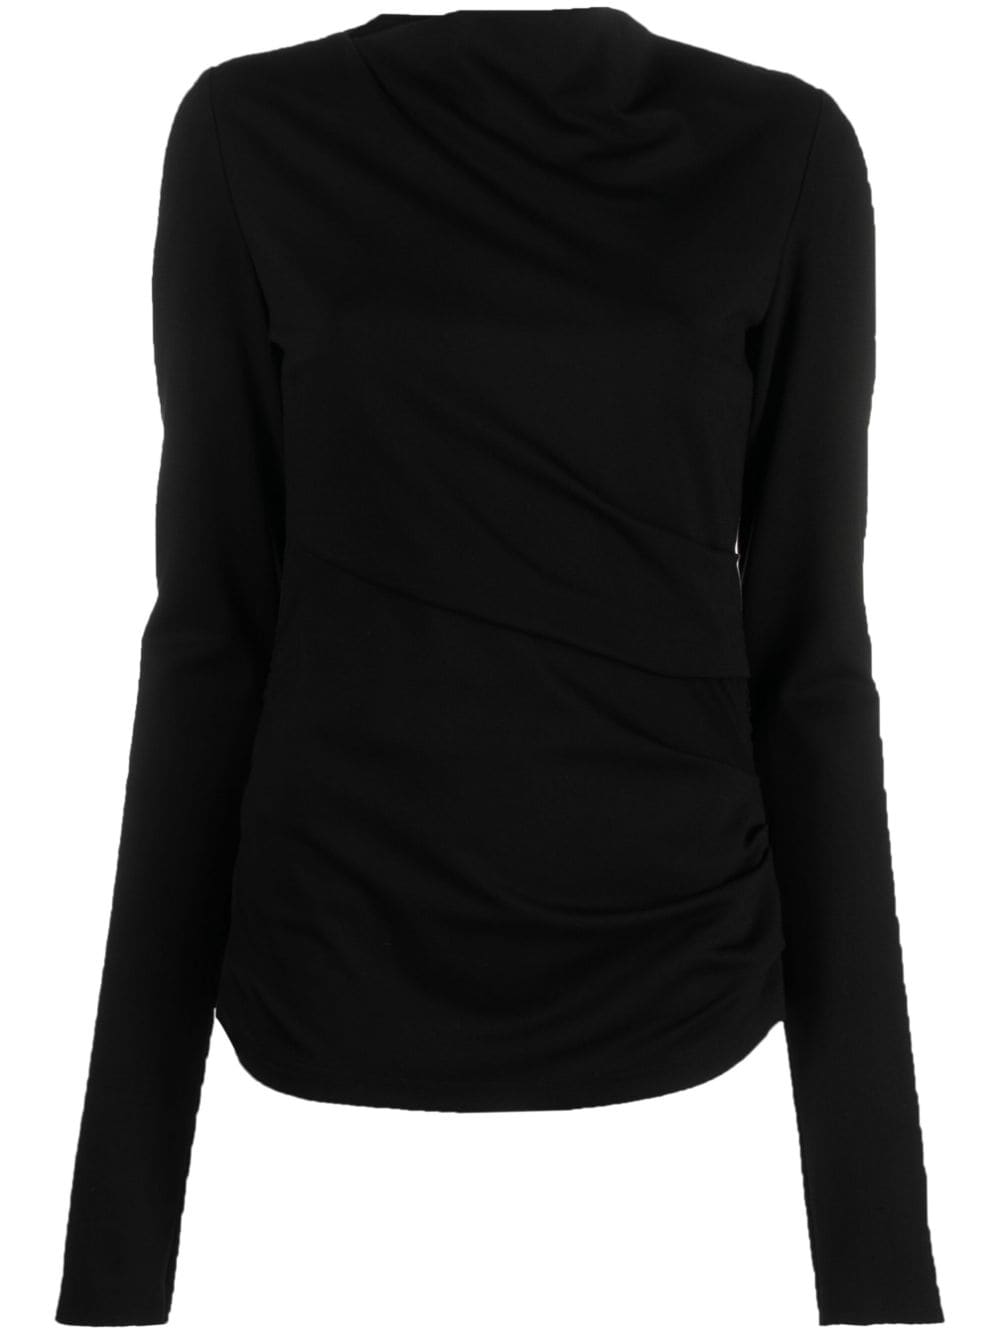 Dorothee Schumacher ruched-detail long-sleeve top - Black